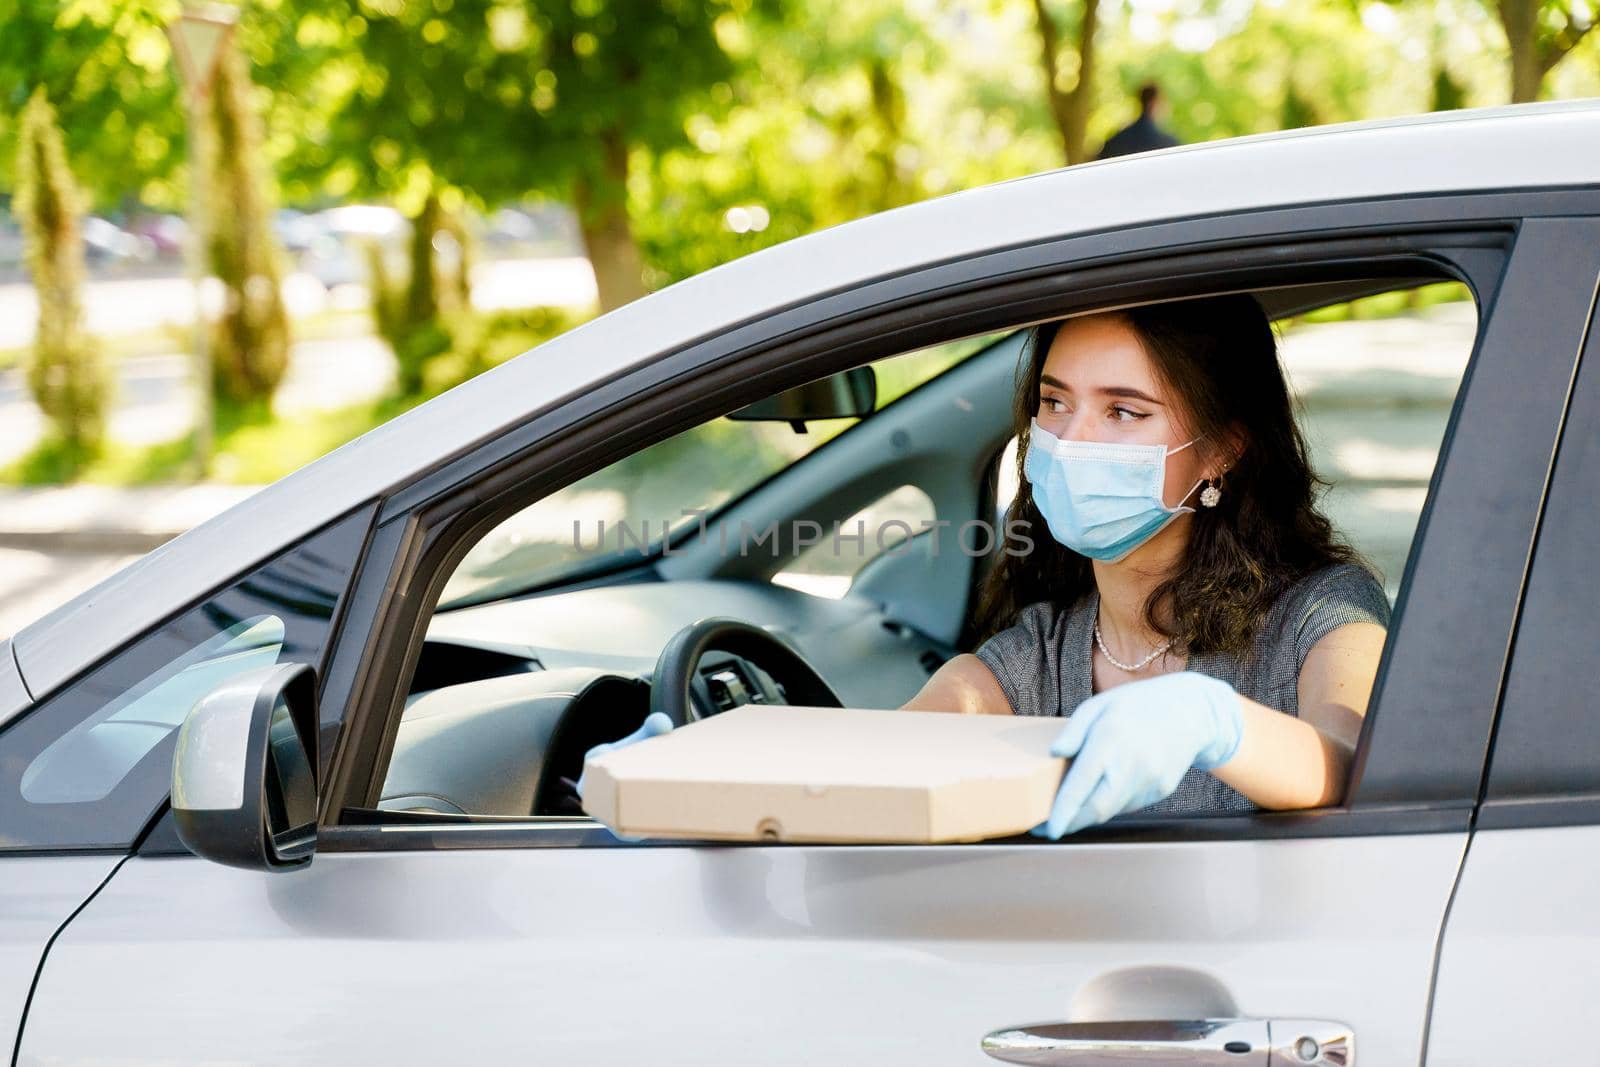 Student with pizza box in car with medical mask and gloves. Delivery food service drive by car. Safe food delivered according social distance